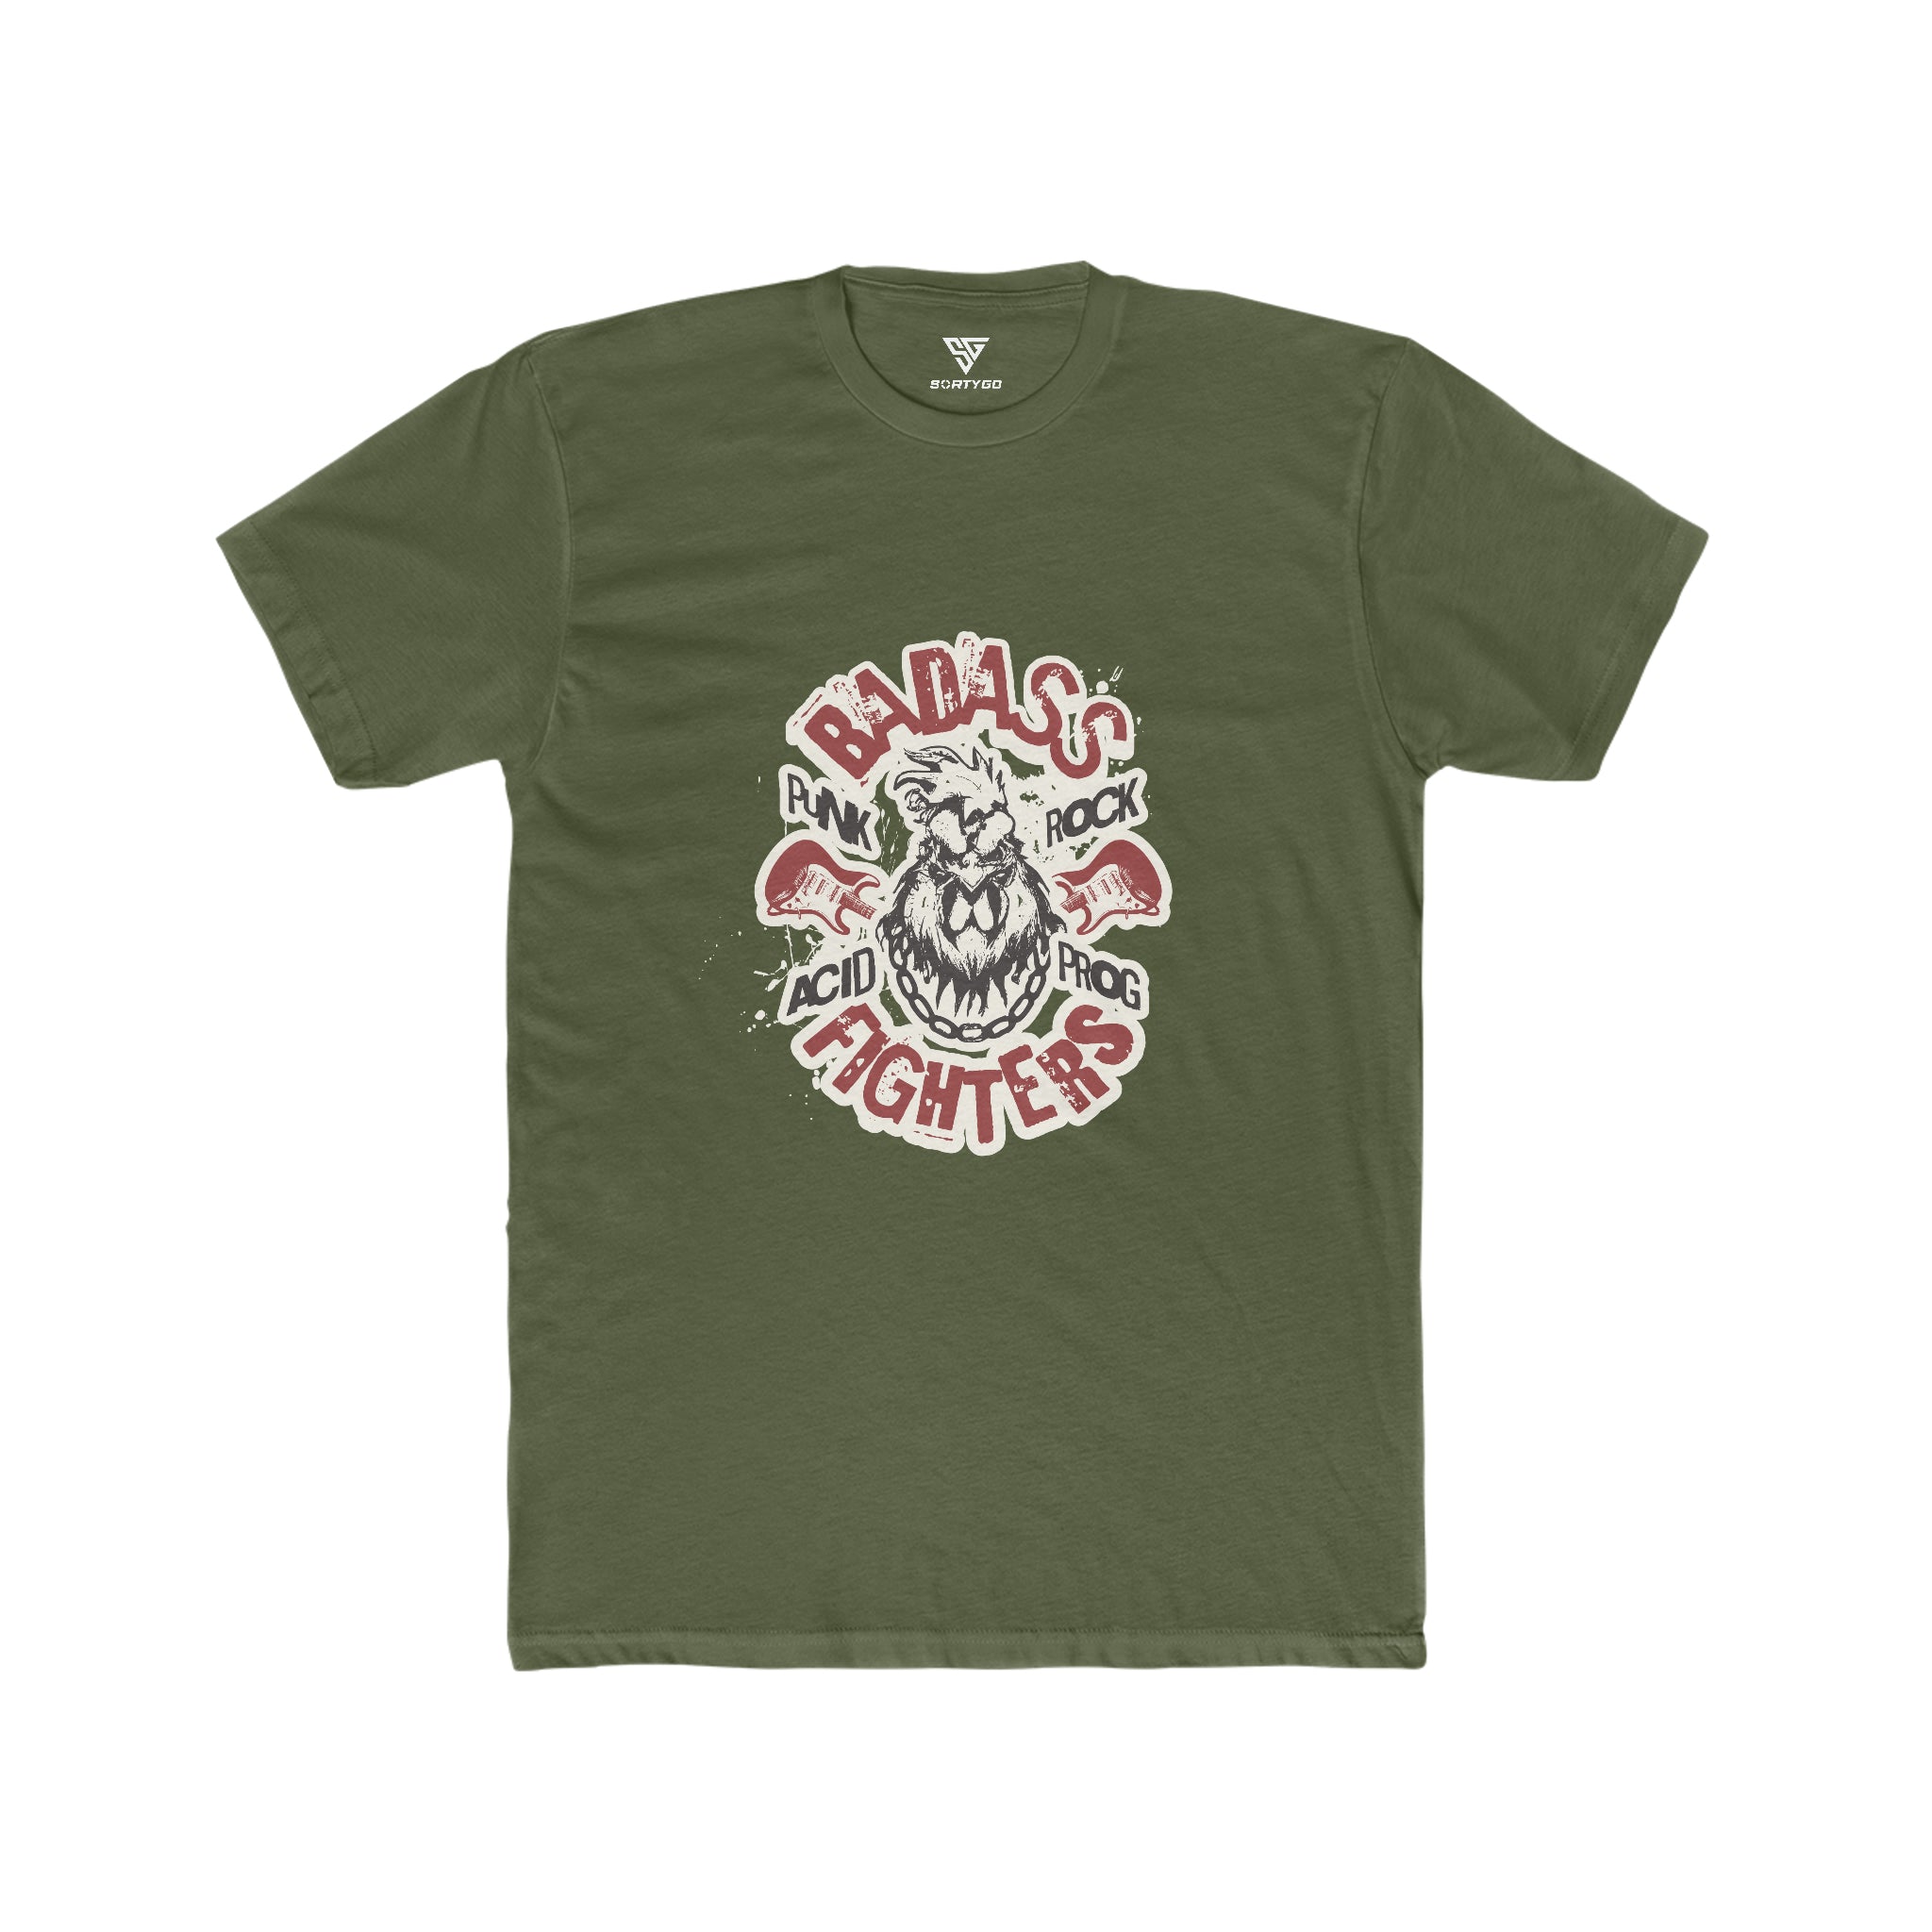 SORTYGO - Badass Fighters Men Fitted T-Shirt in Solid Military Green